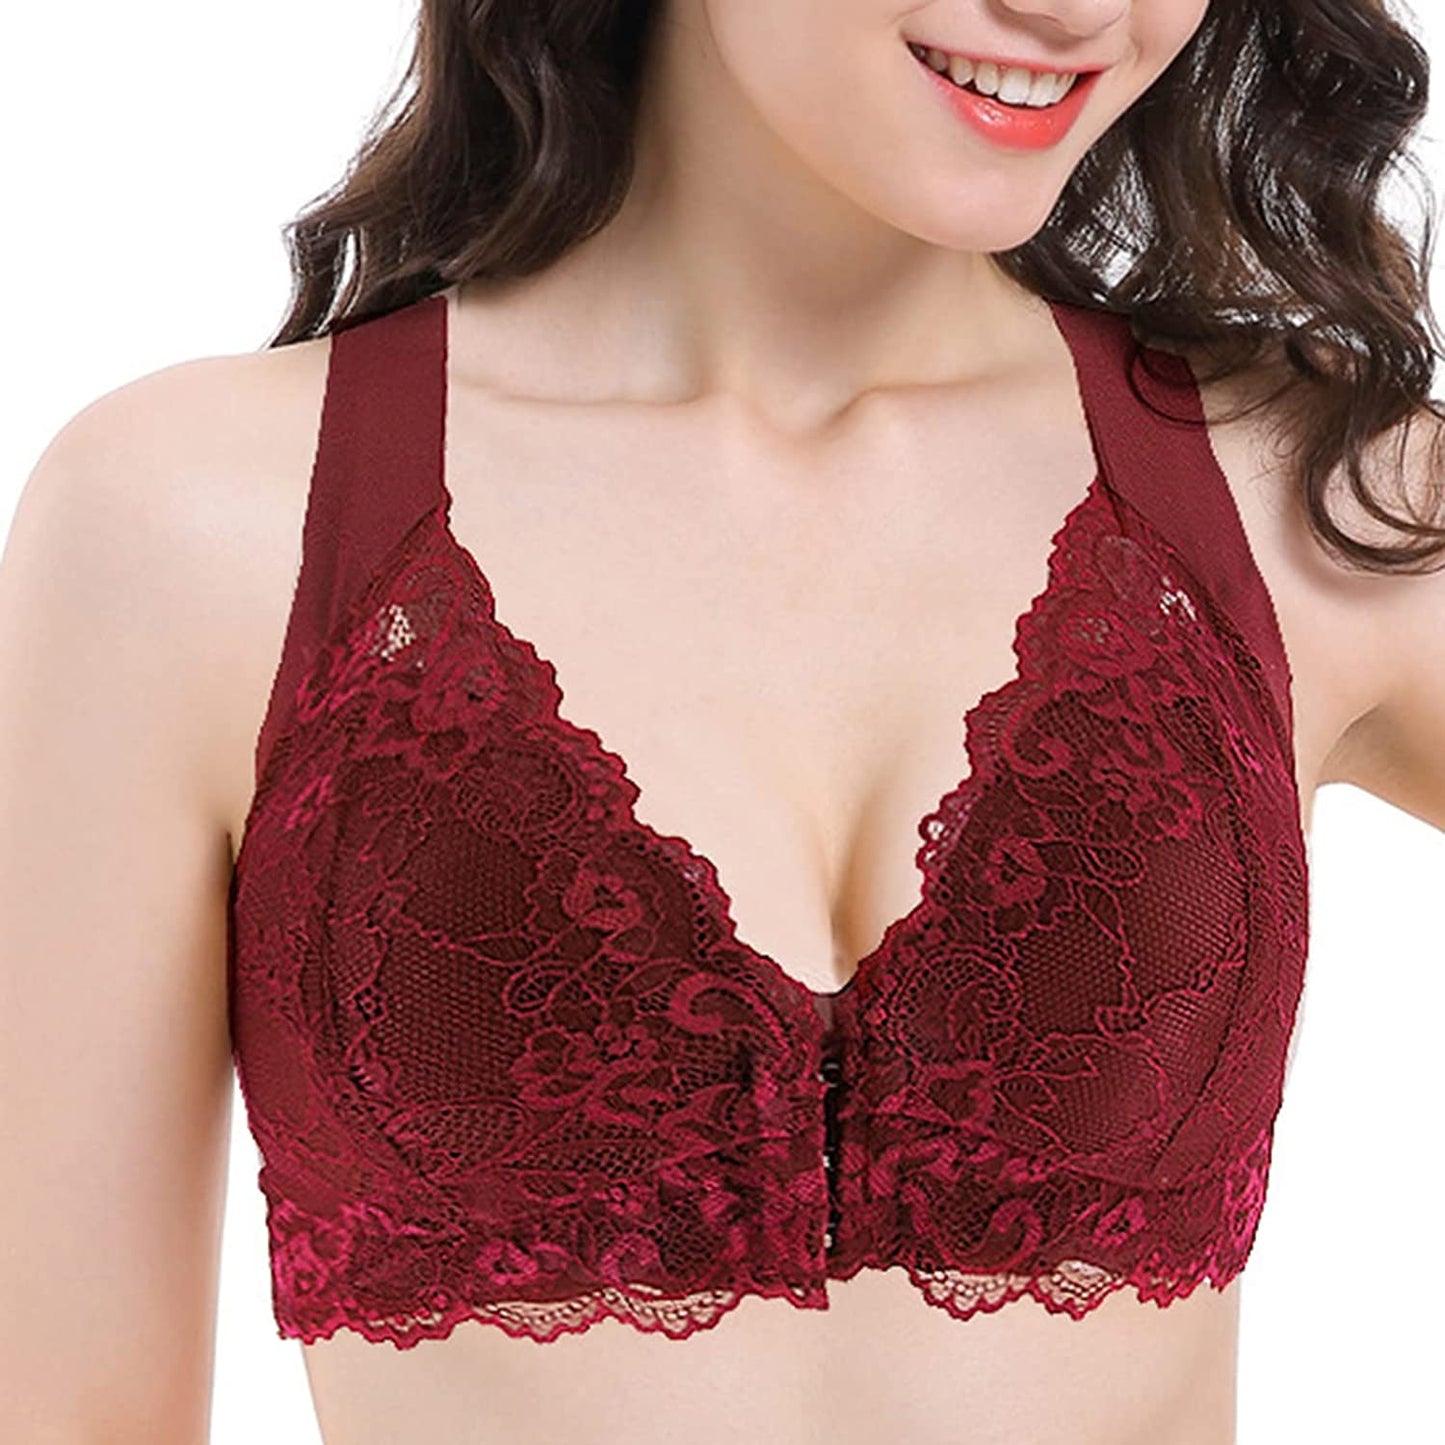 Bras for Women, Women's Adjustable Sports Front Closure Extra-Elastic Breathable Lace Trim Bra, Ladies Comfortable